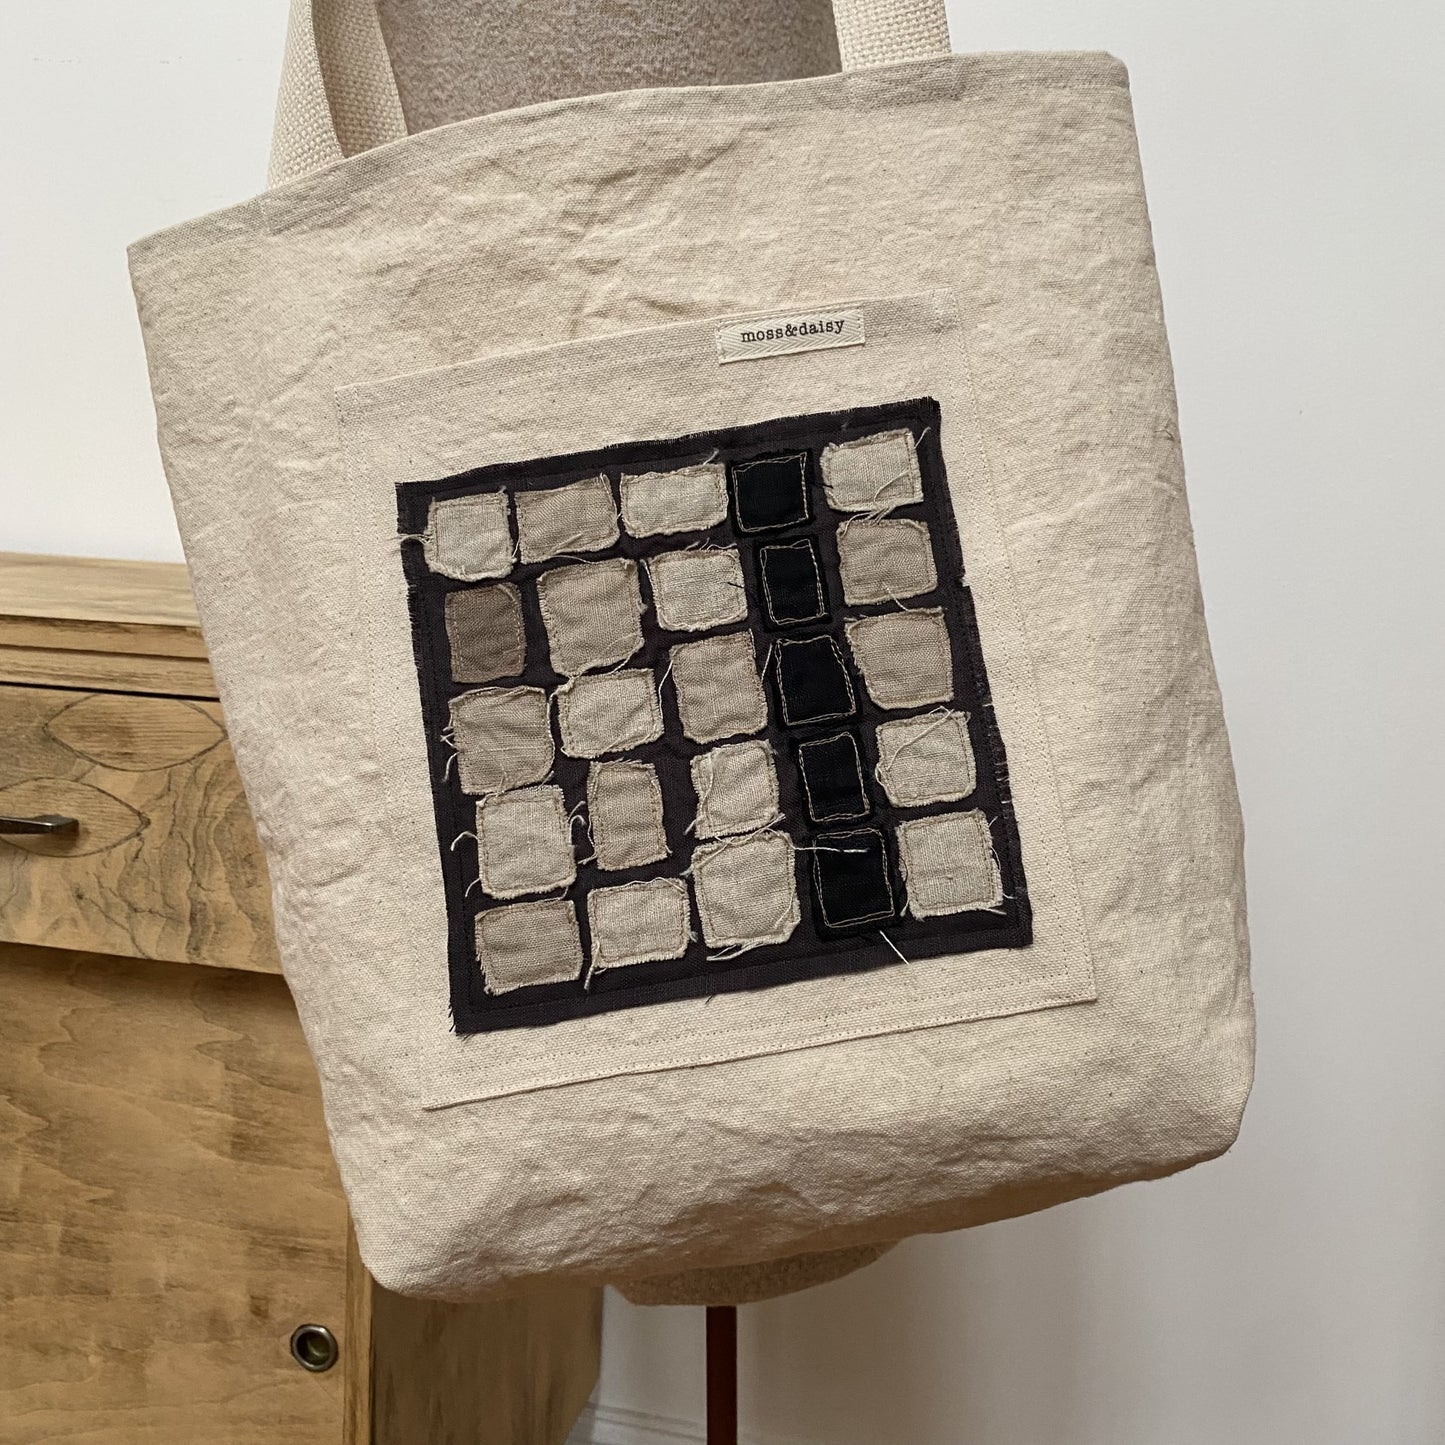 patch pocket tote